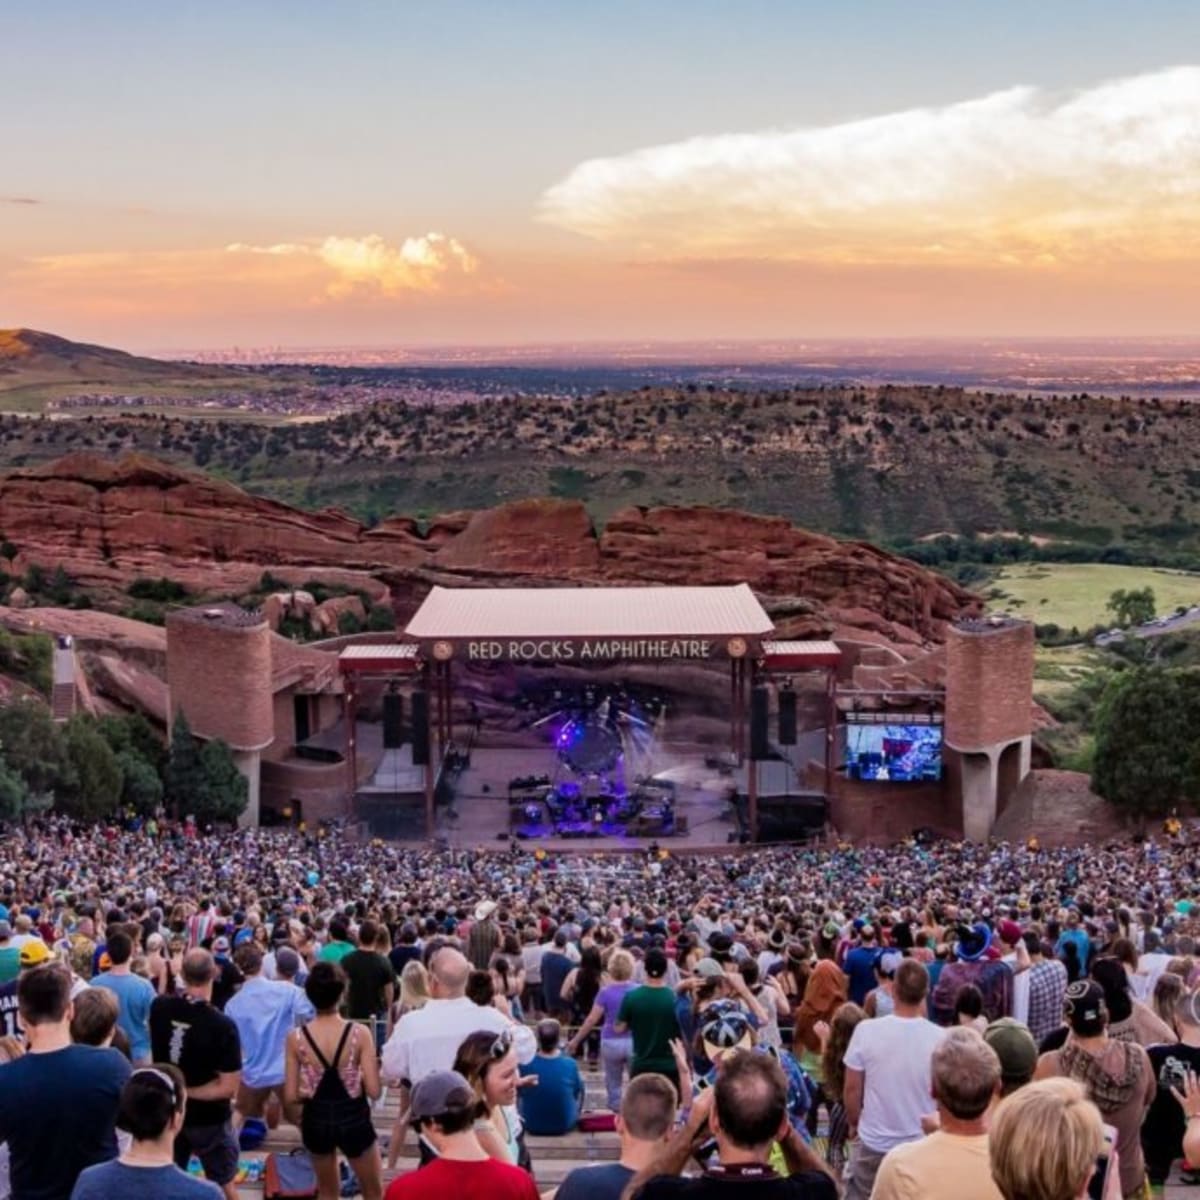 biograf komponent Ægte Red Rocks Amphitheatre to Reopen This Summer With Events at 2,500 Capacity  - EDM.com - The Latest Electronic Dance Music News, Reviews & Artists